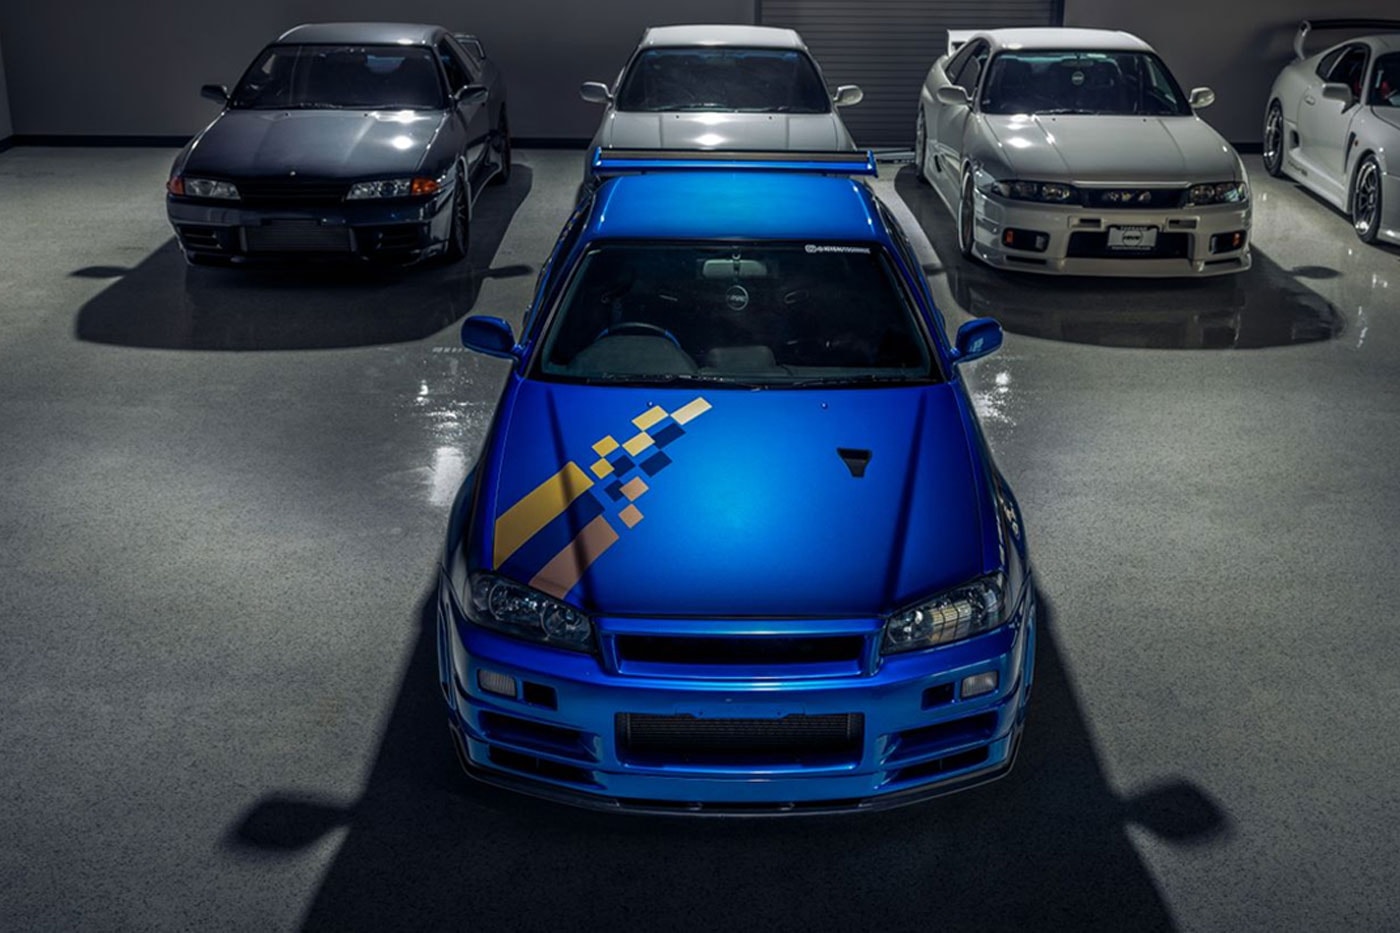 Nissan R34 Skyline Driven By Paul Walker In Fast And Furious Heads